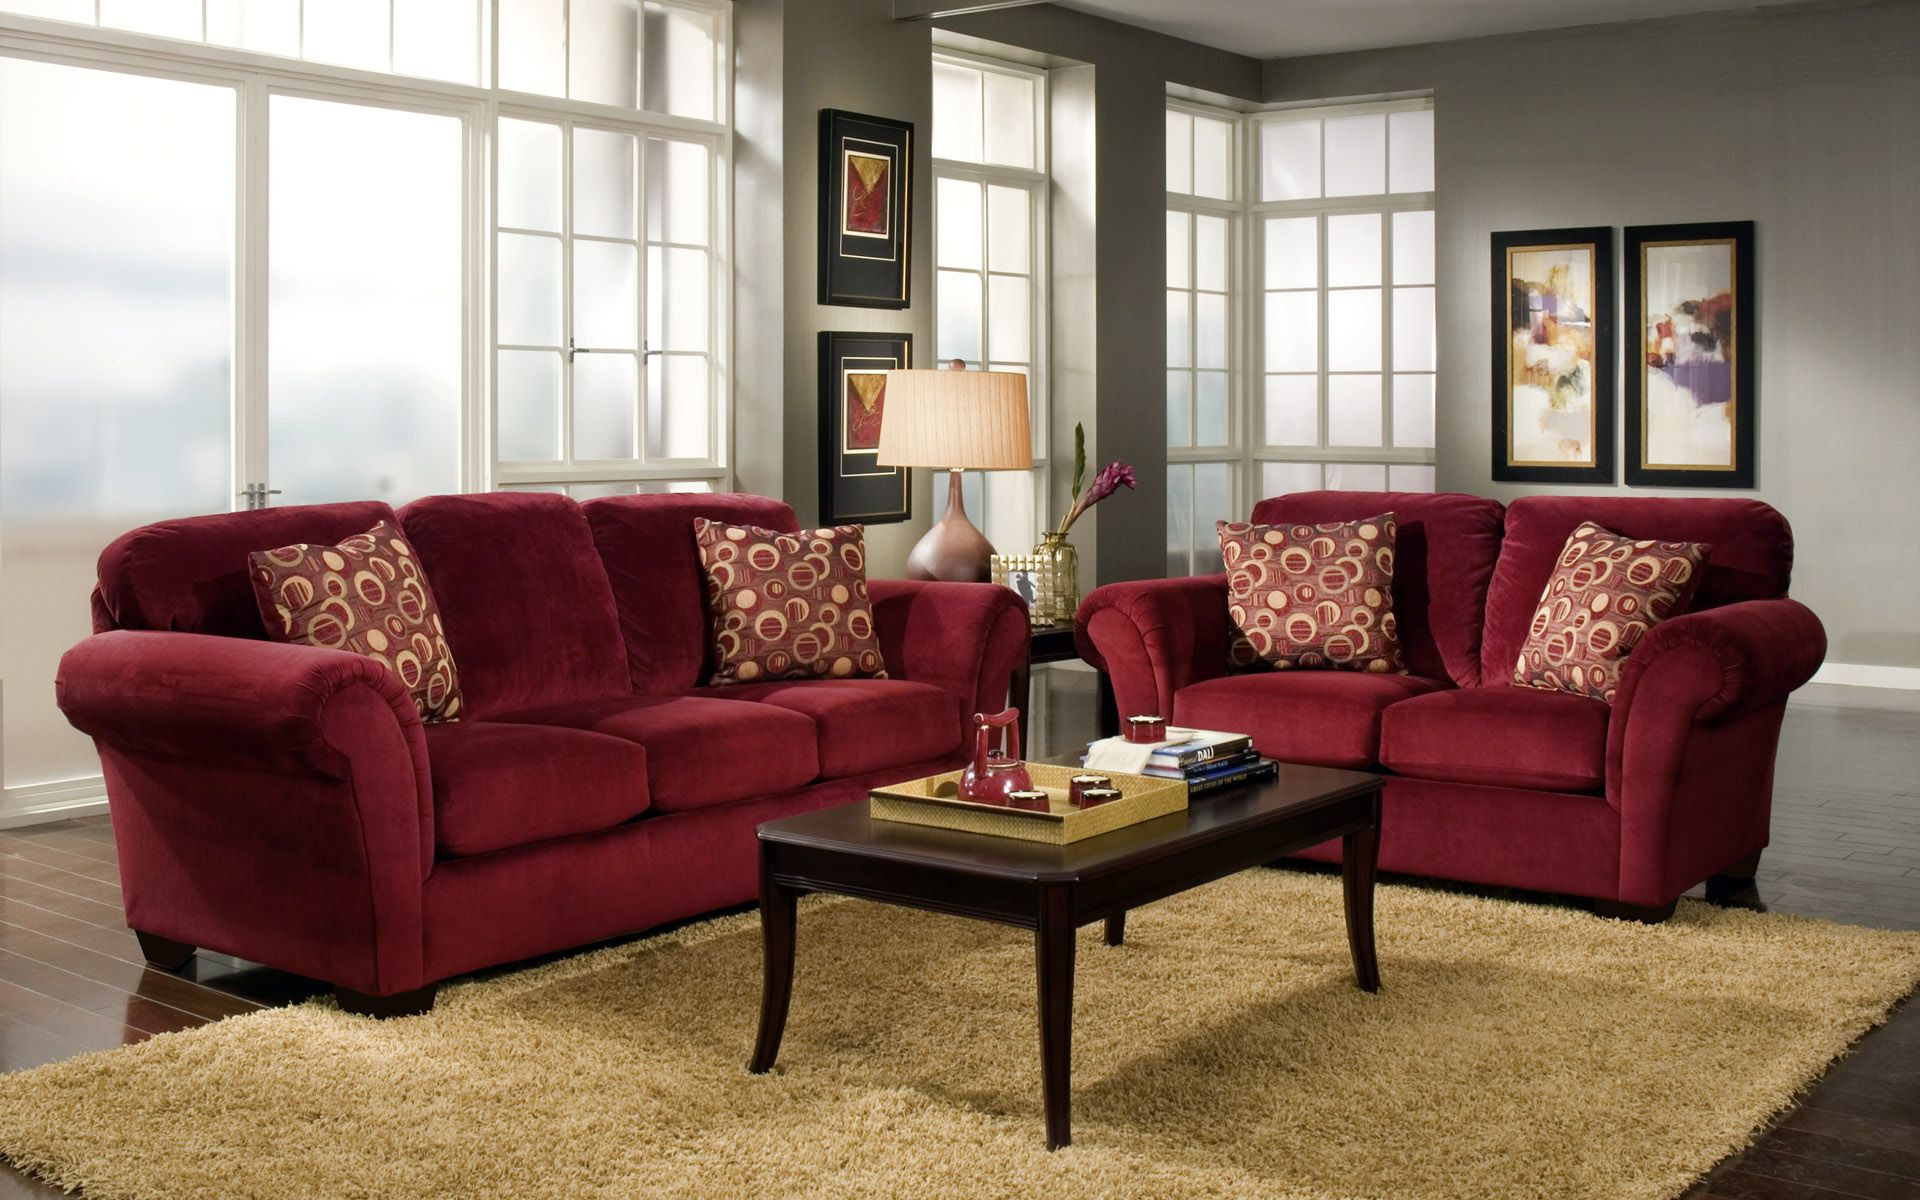 Red Sofa Living Room Ideas
 Pin by Layla Baso on Interior Design & Home Decor